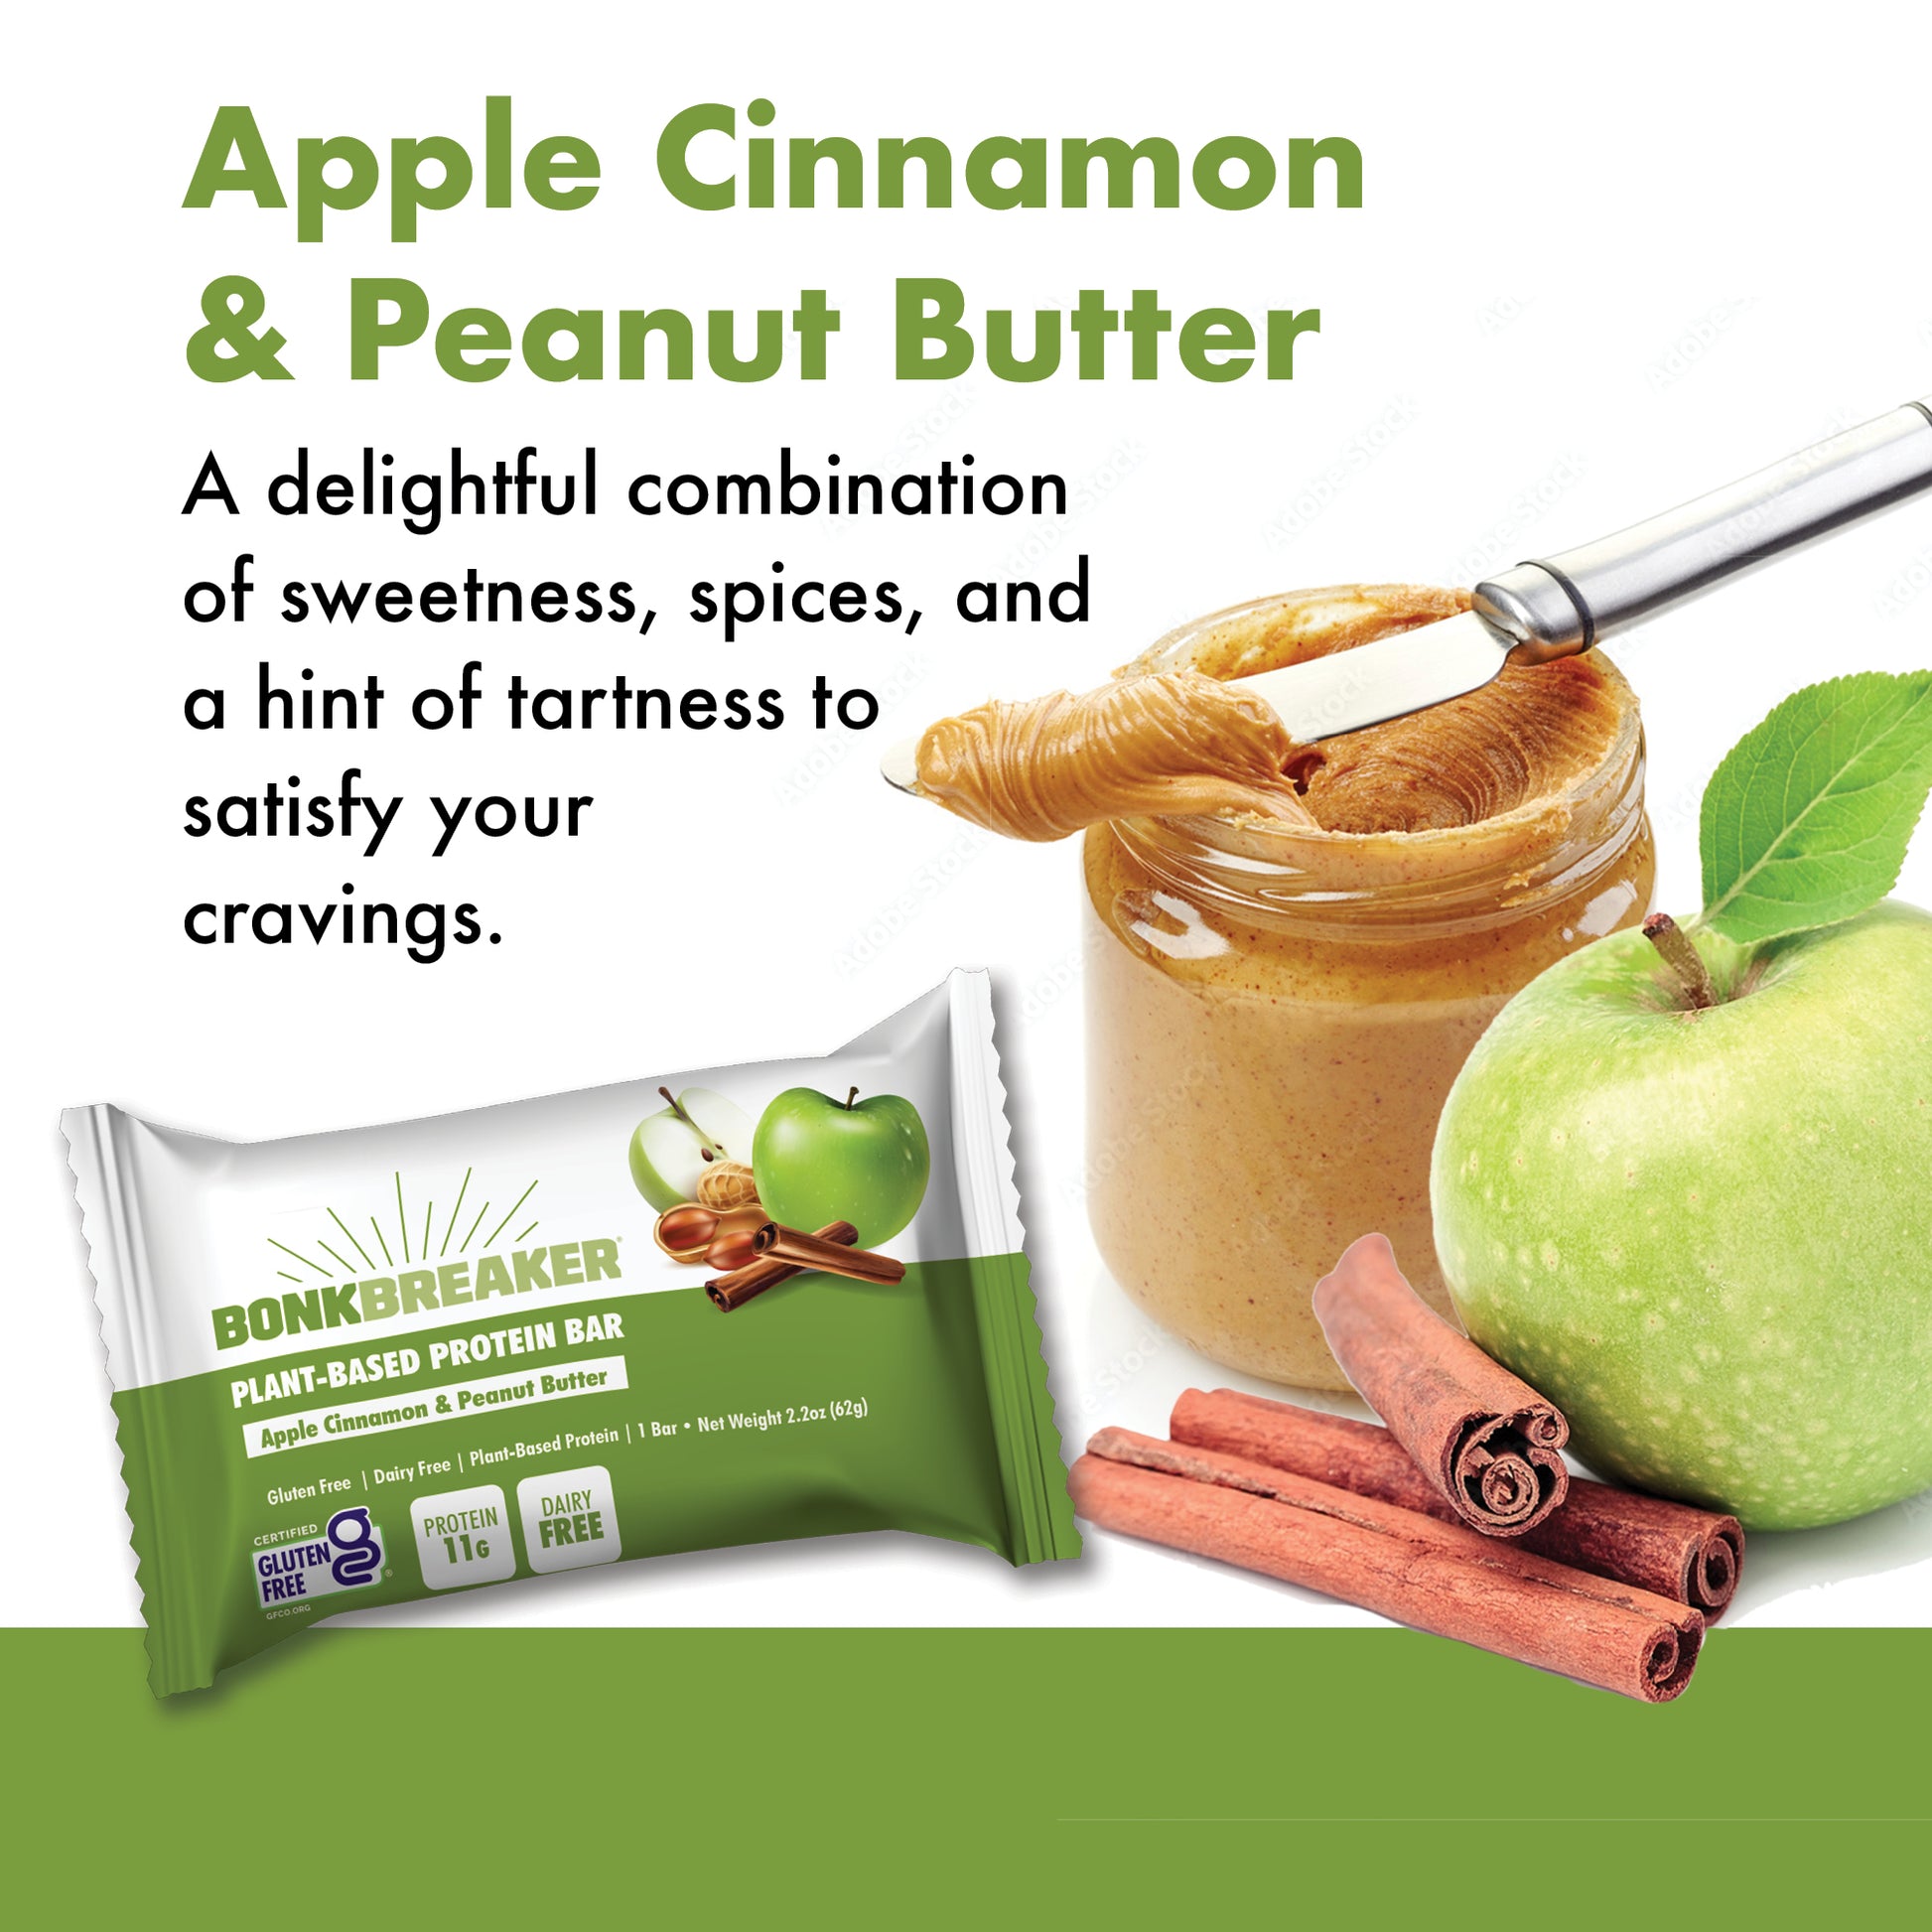 Apple Cinnamon & Peanut Butter - A delightful combination of sweetness, spices, and a hint of tartness to satisfy your cravings.